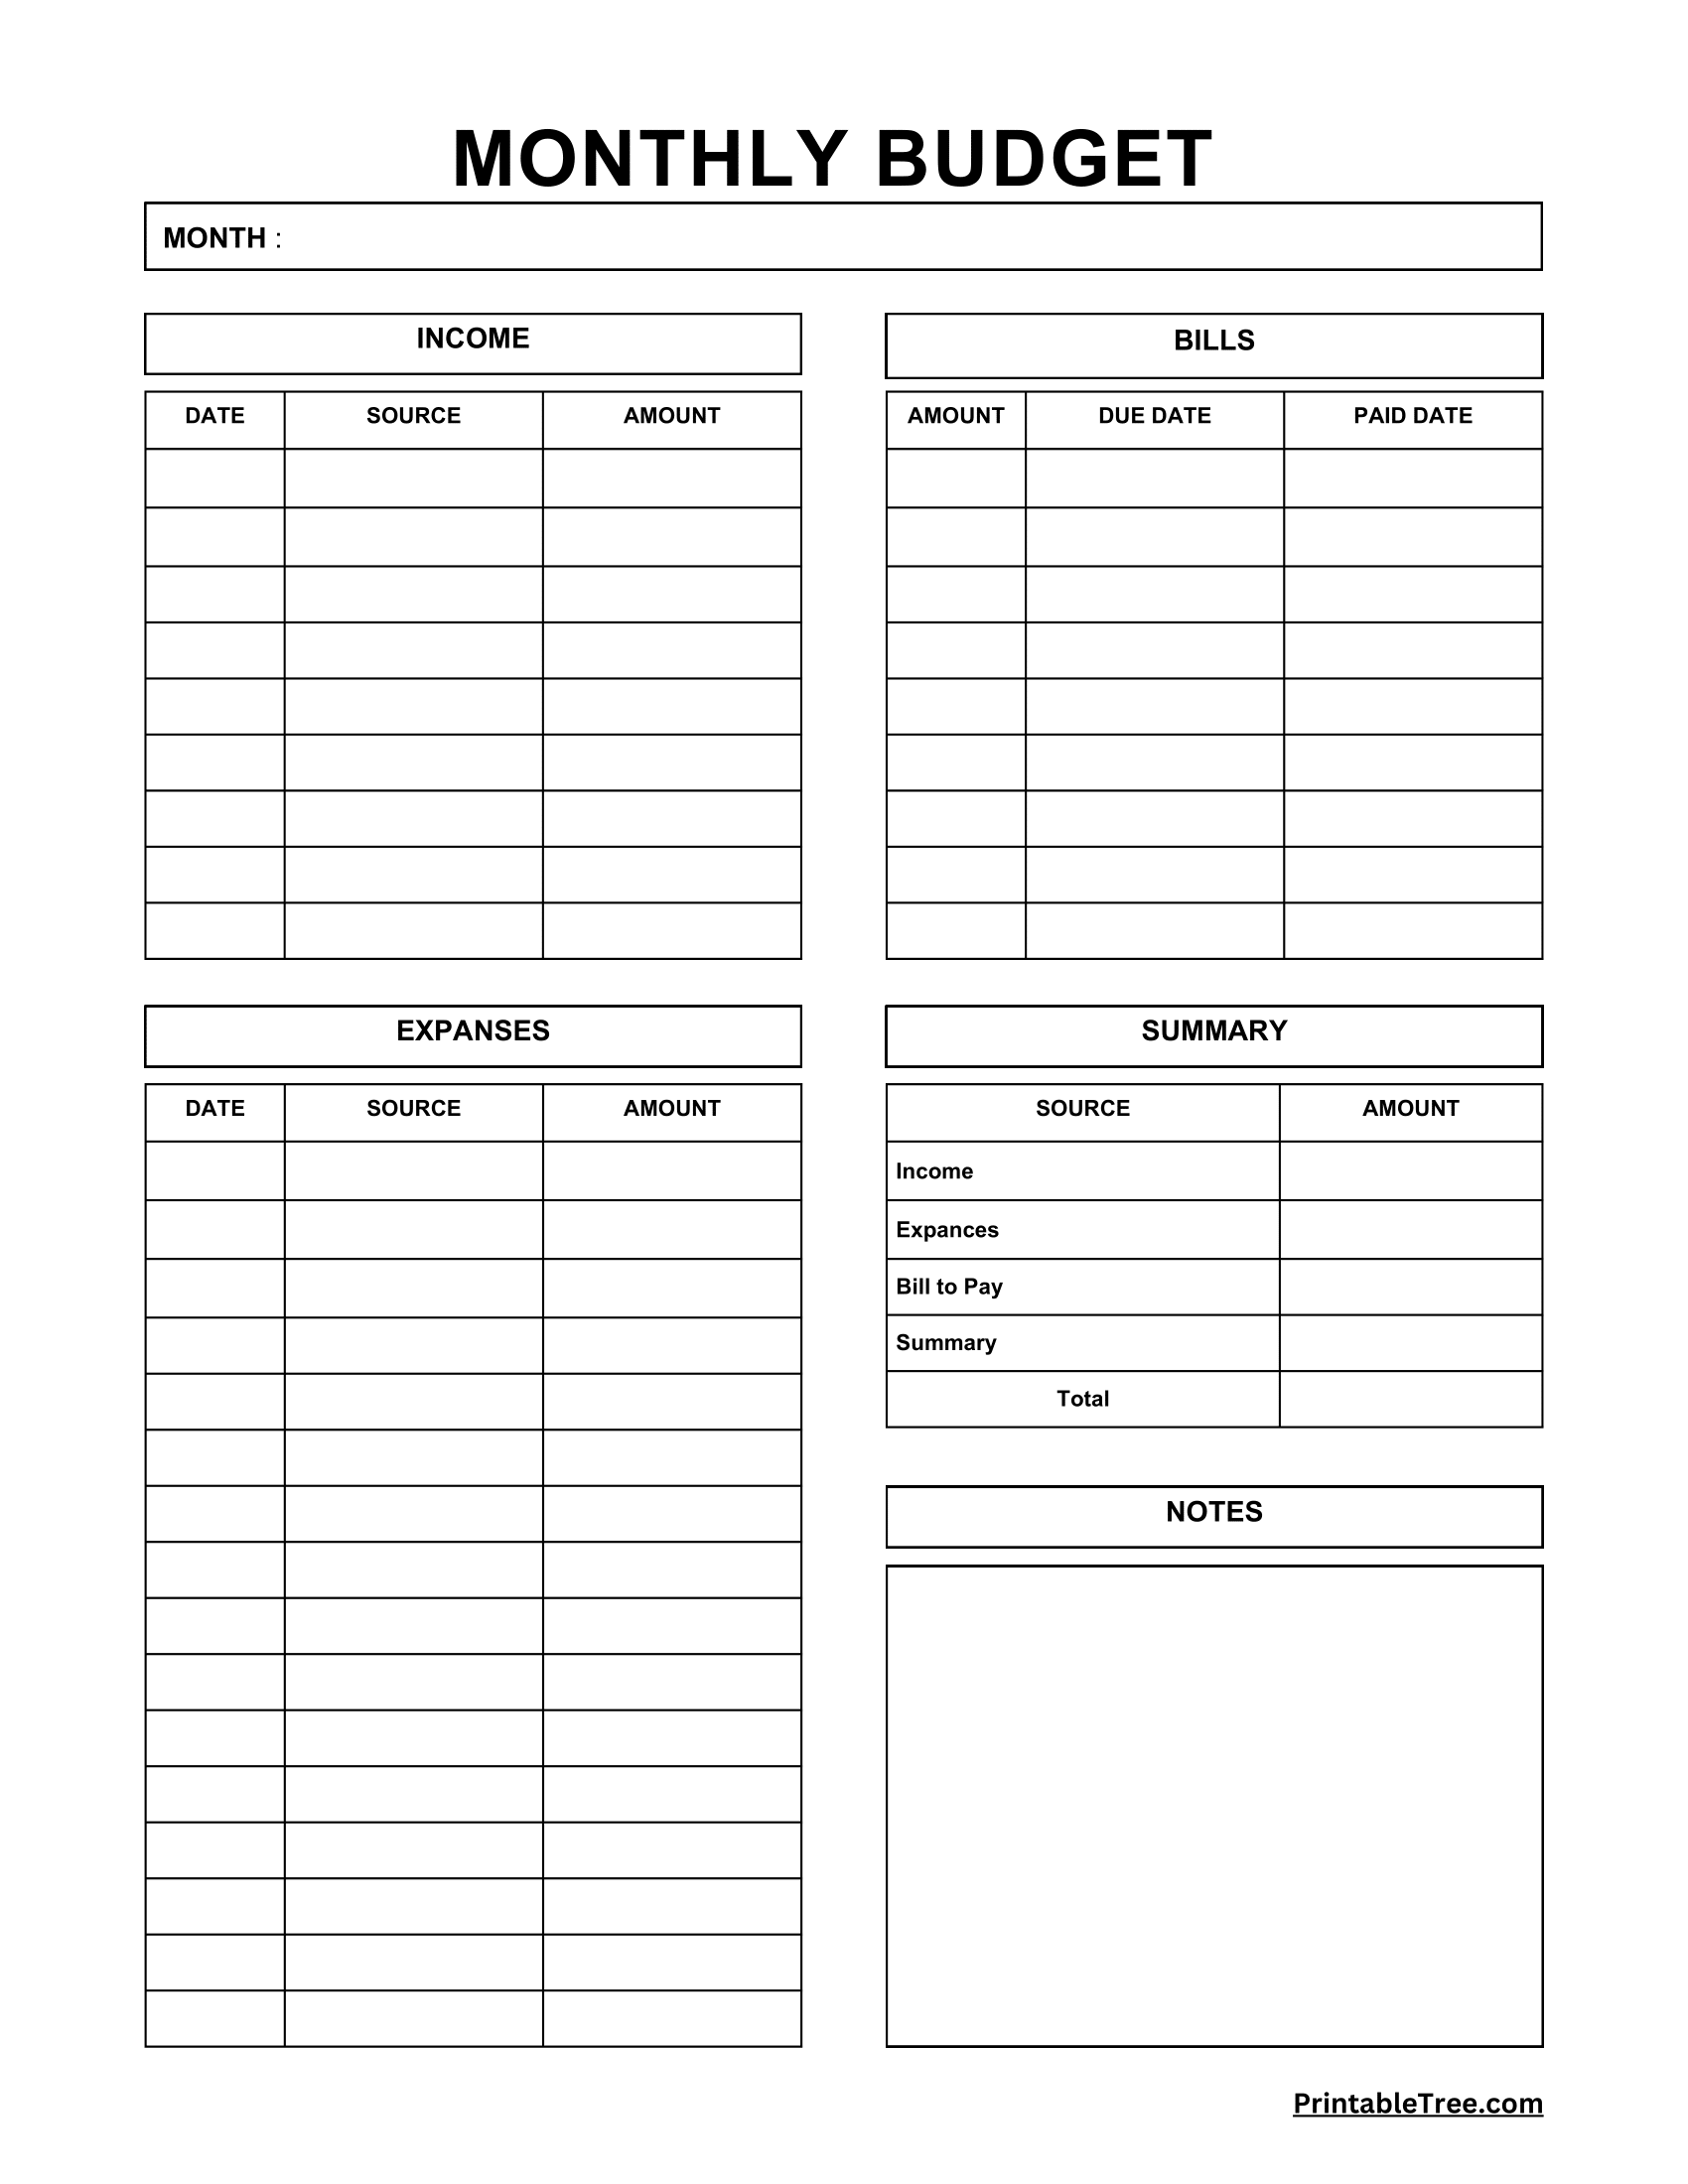 free-download-printable-monthly-budget-planner-pdf-templates